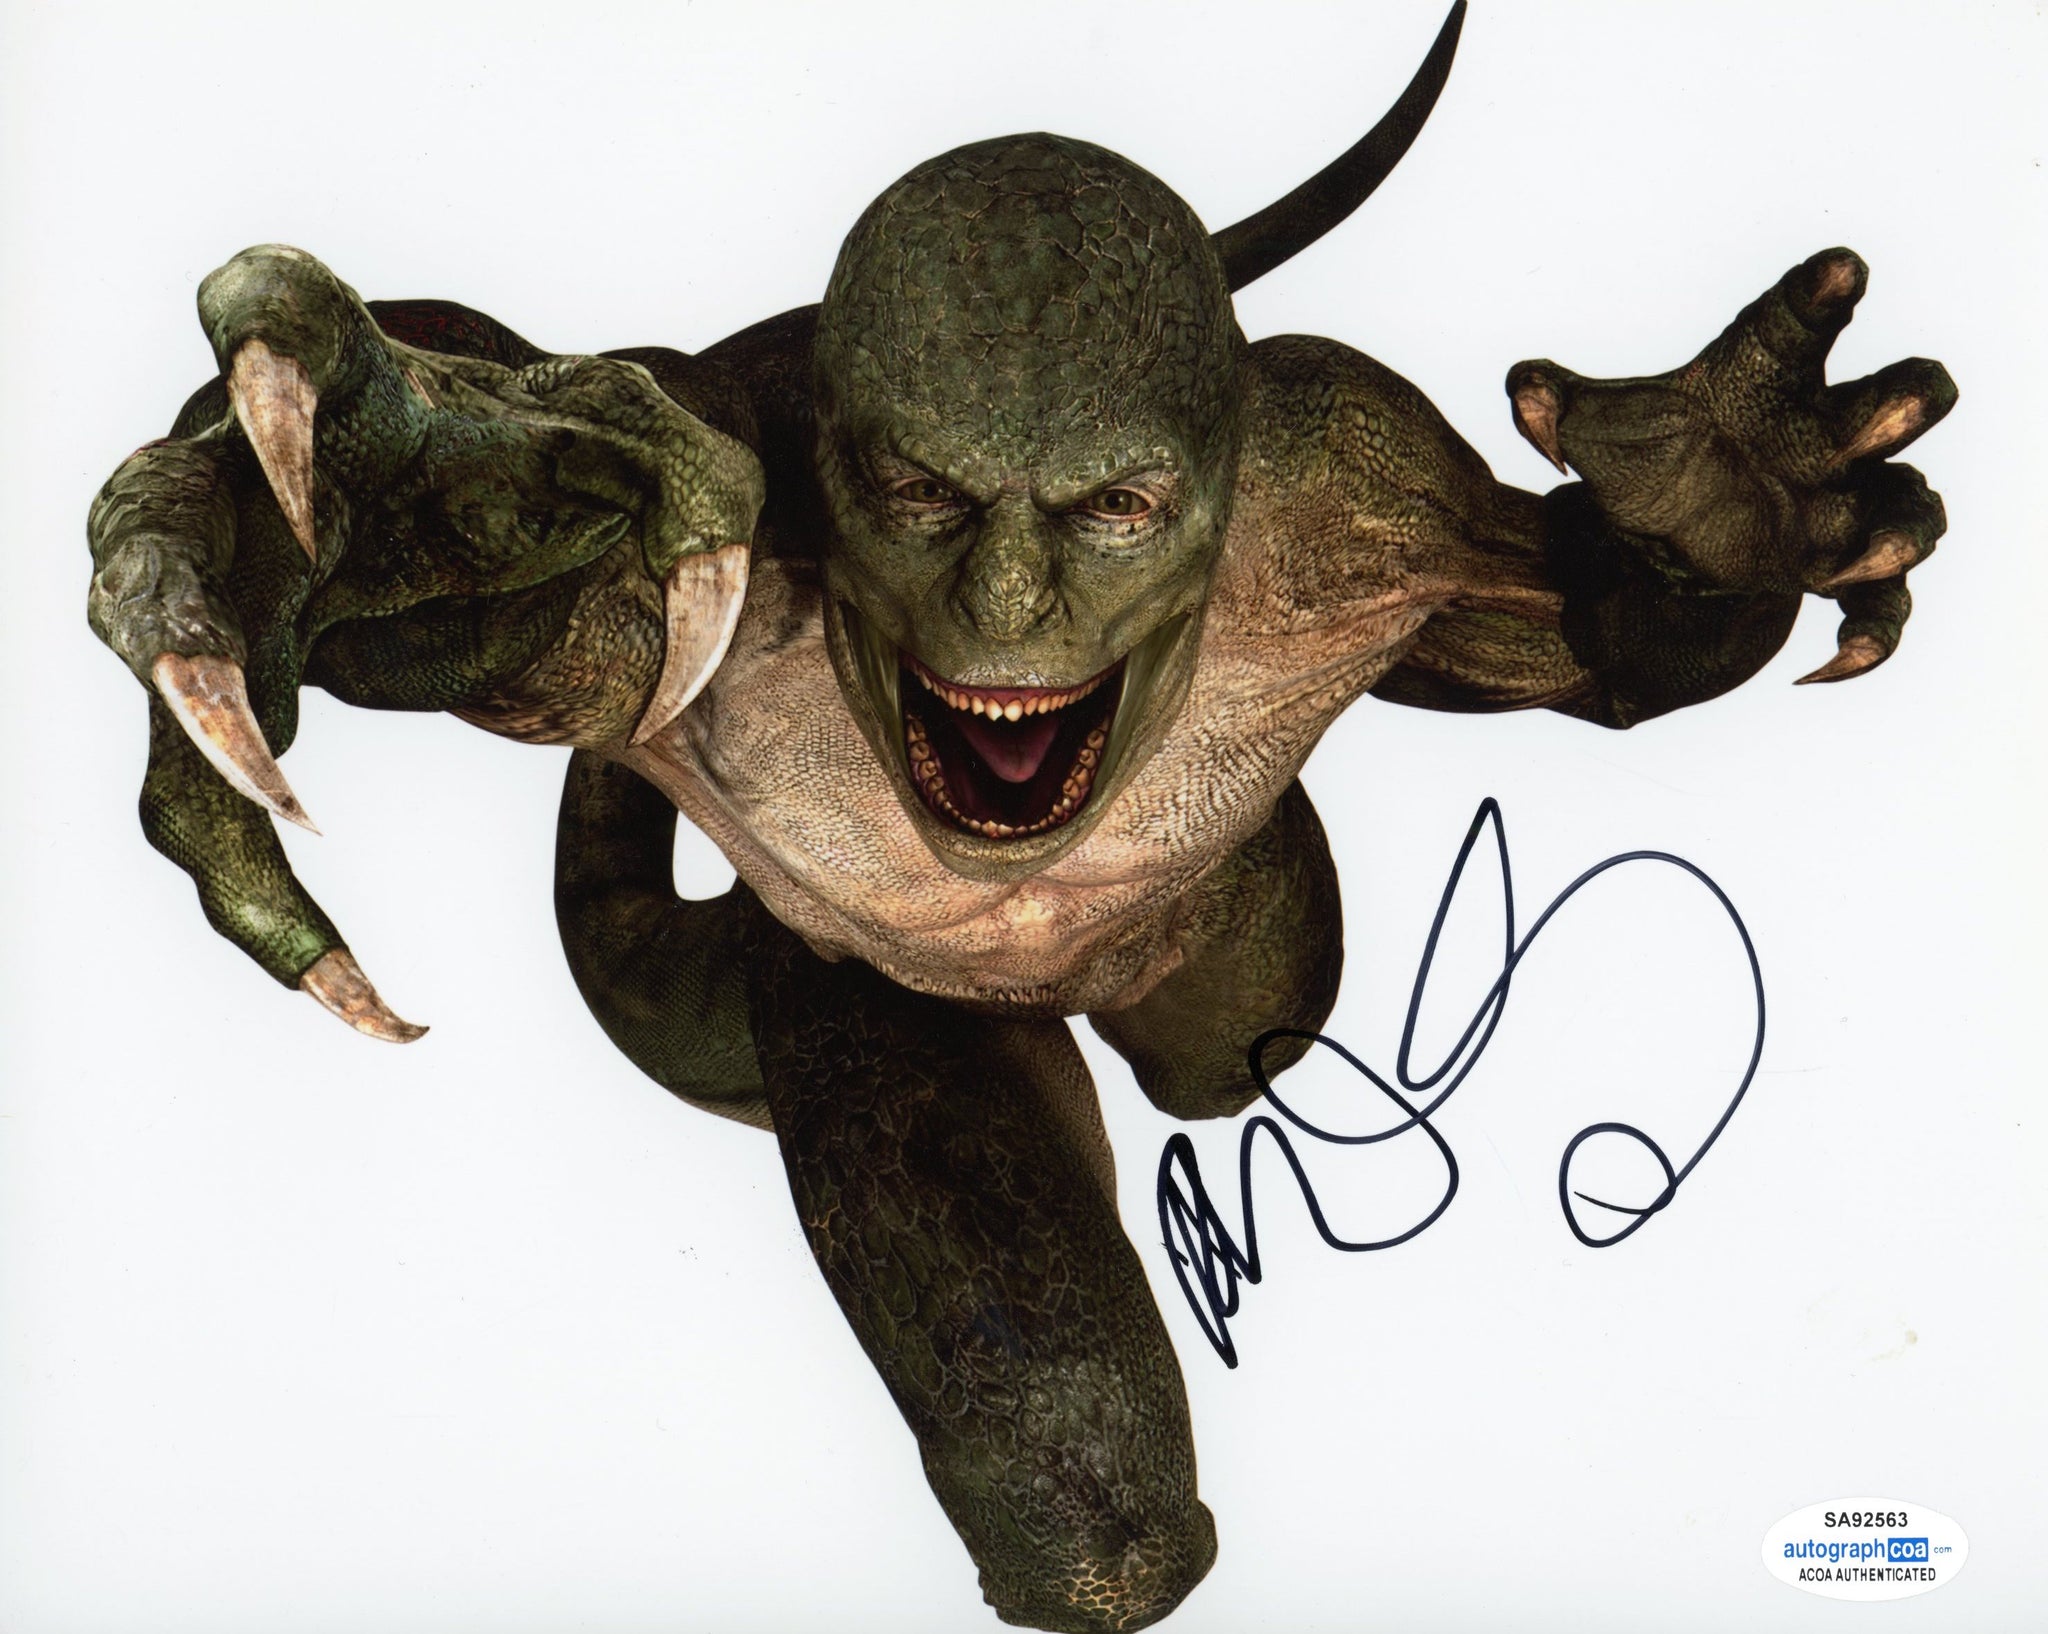 Rhys Ifans Spiderman Signed Autograph 8x10 Photo ACOA